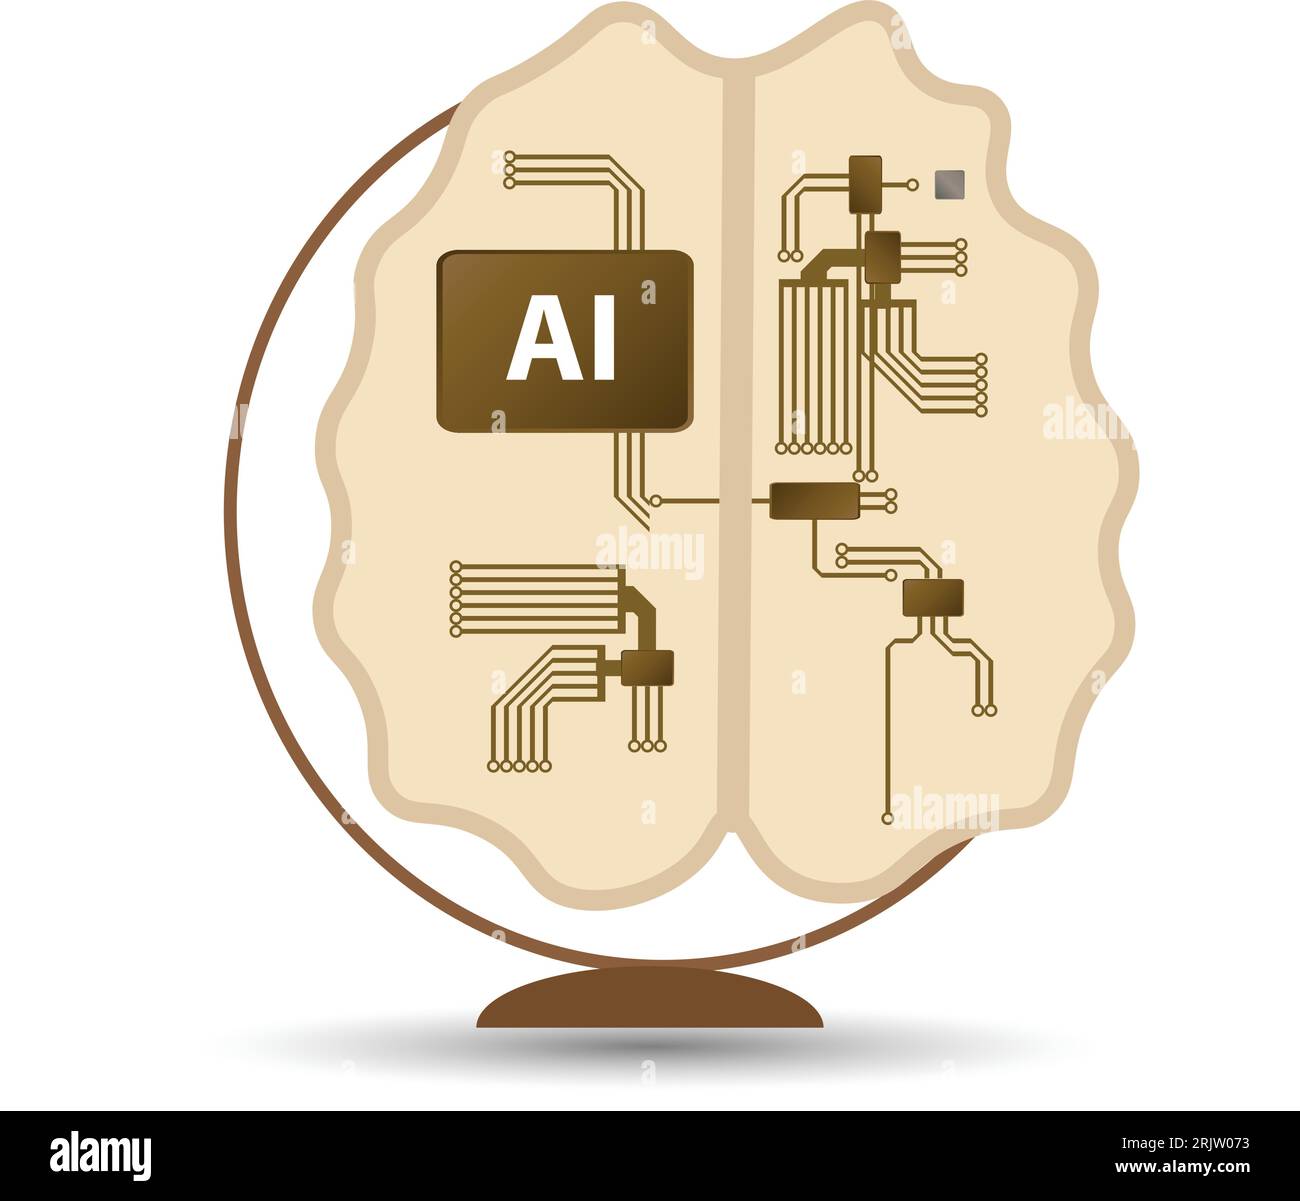 Brain with circuits and ai text on a desktop holder Stock Vector